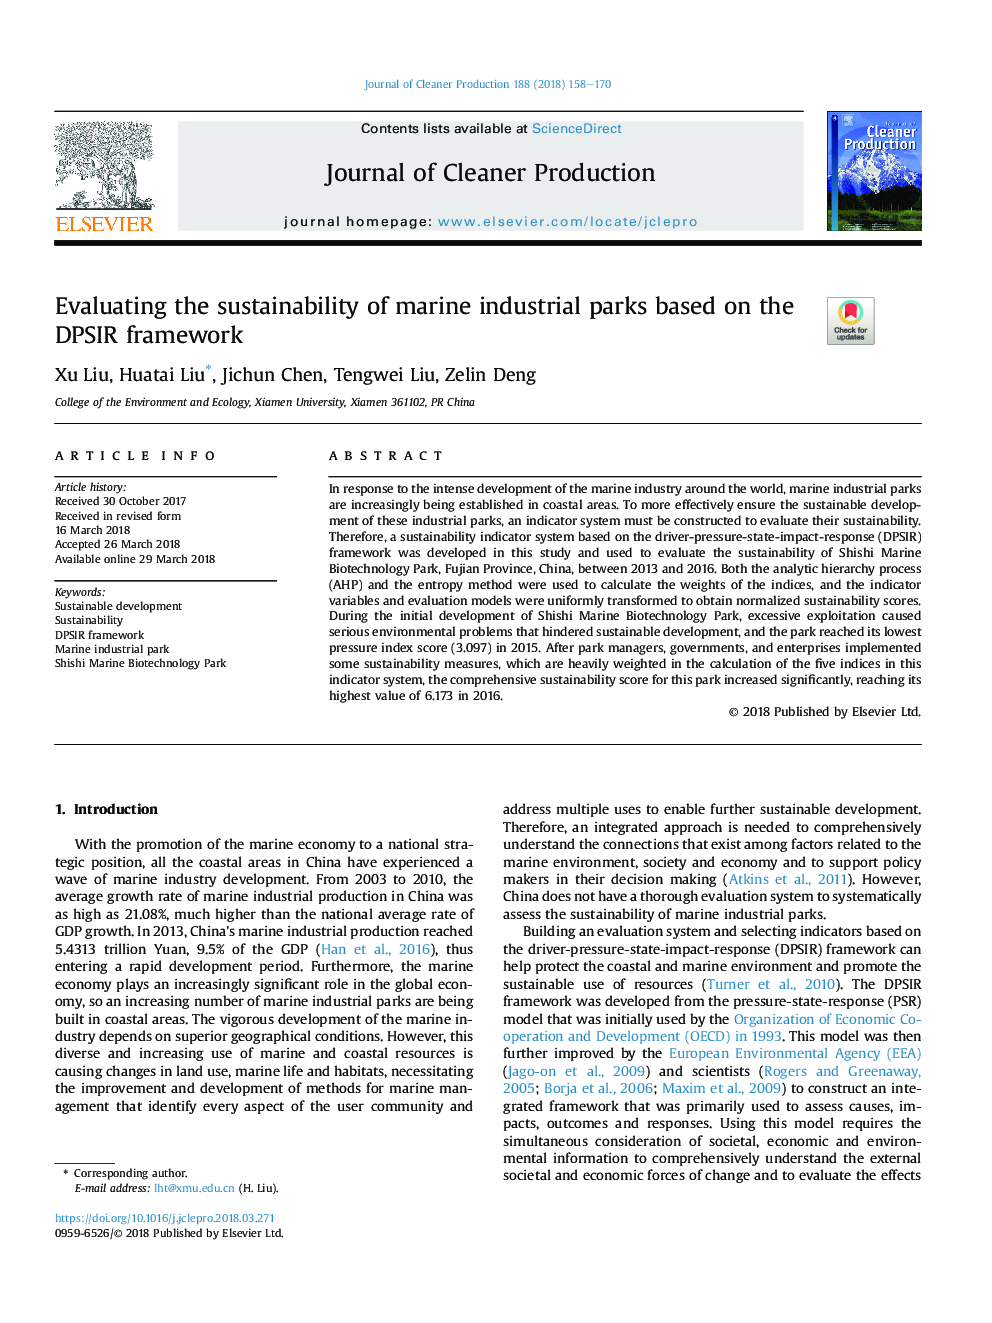 Evaluating the sustainability of marine industrial parks based on the DPSIR framework